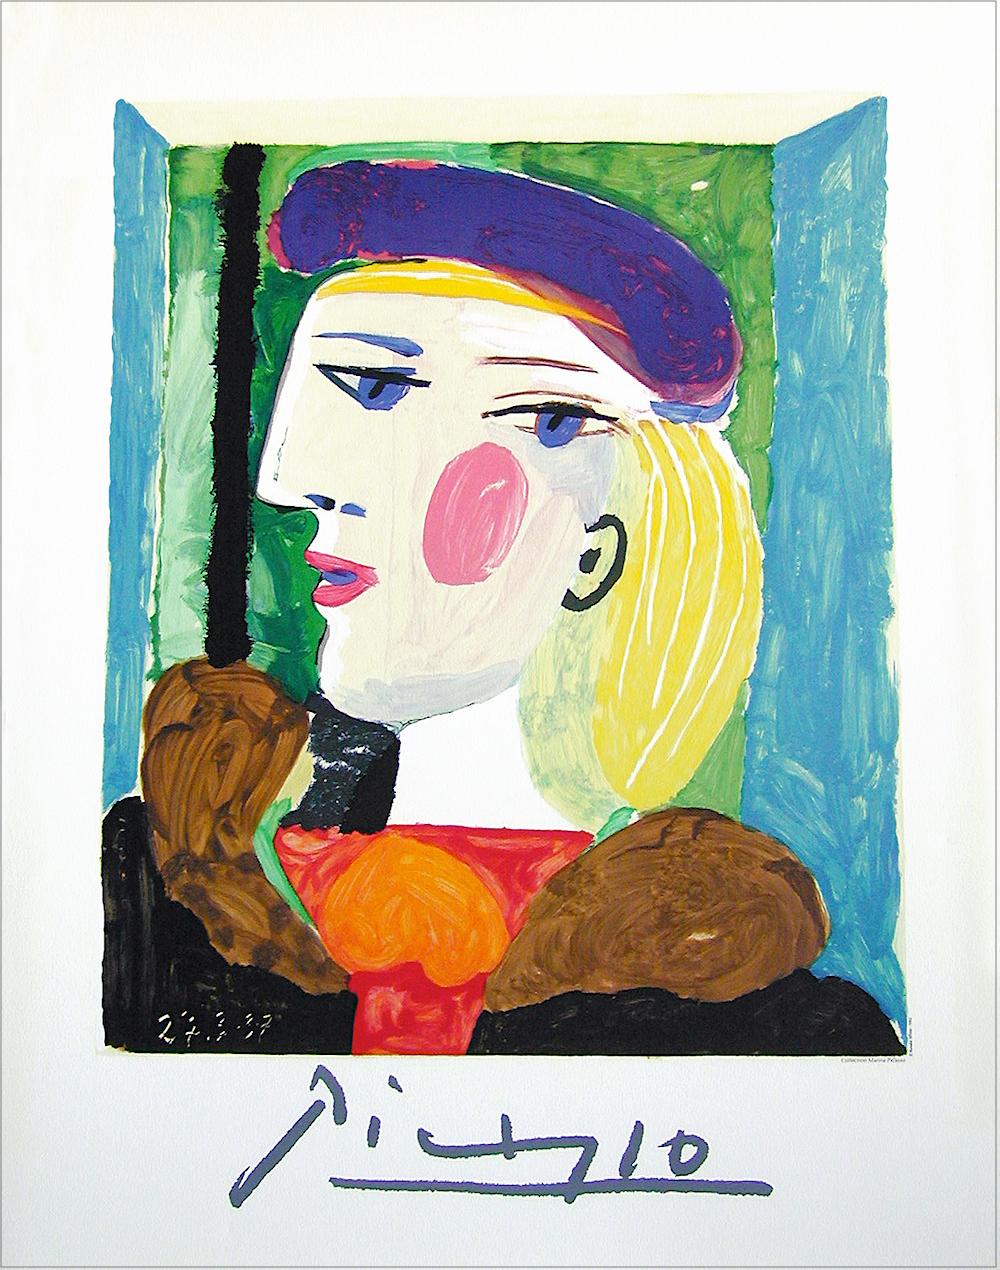 (after) Pablo Picasso Abstract Print – FEMME PROFILE (Marie Therese Walter) Lithographie, Porträt Blonde Frau mit blauem Beret